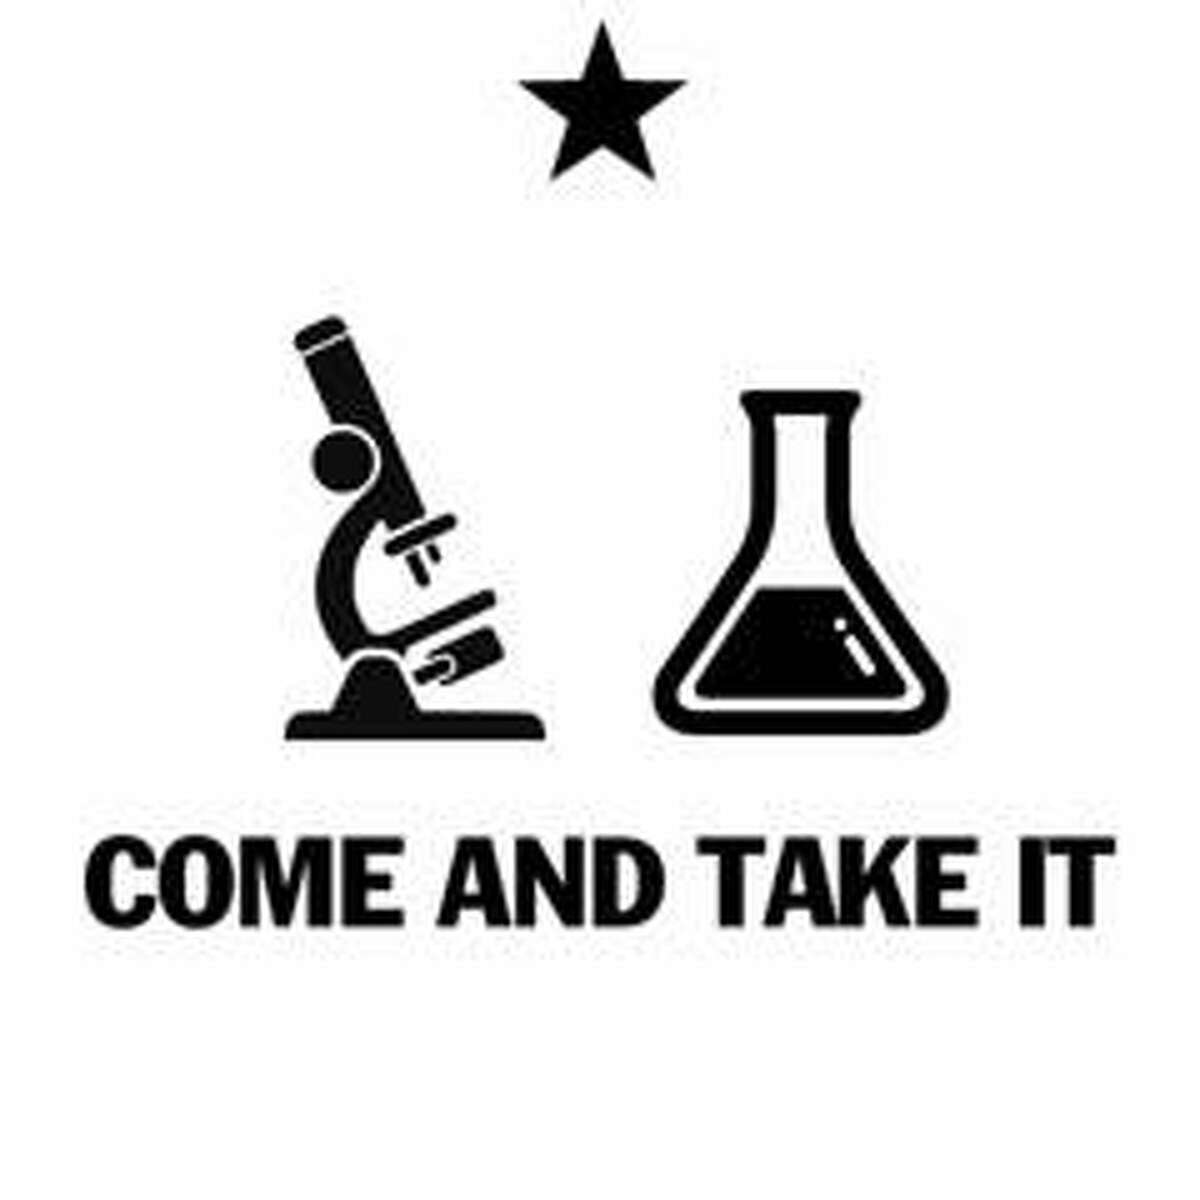 San Antonio March for Science organizers came up with a logo that merges scientific tools and concepts with iconic San Antonio and Texas symbols.